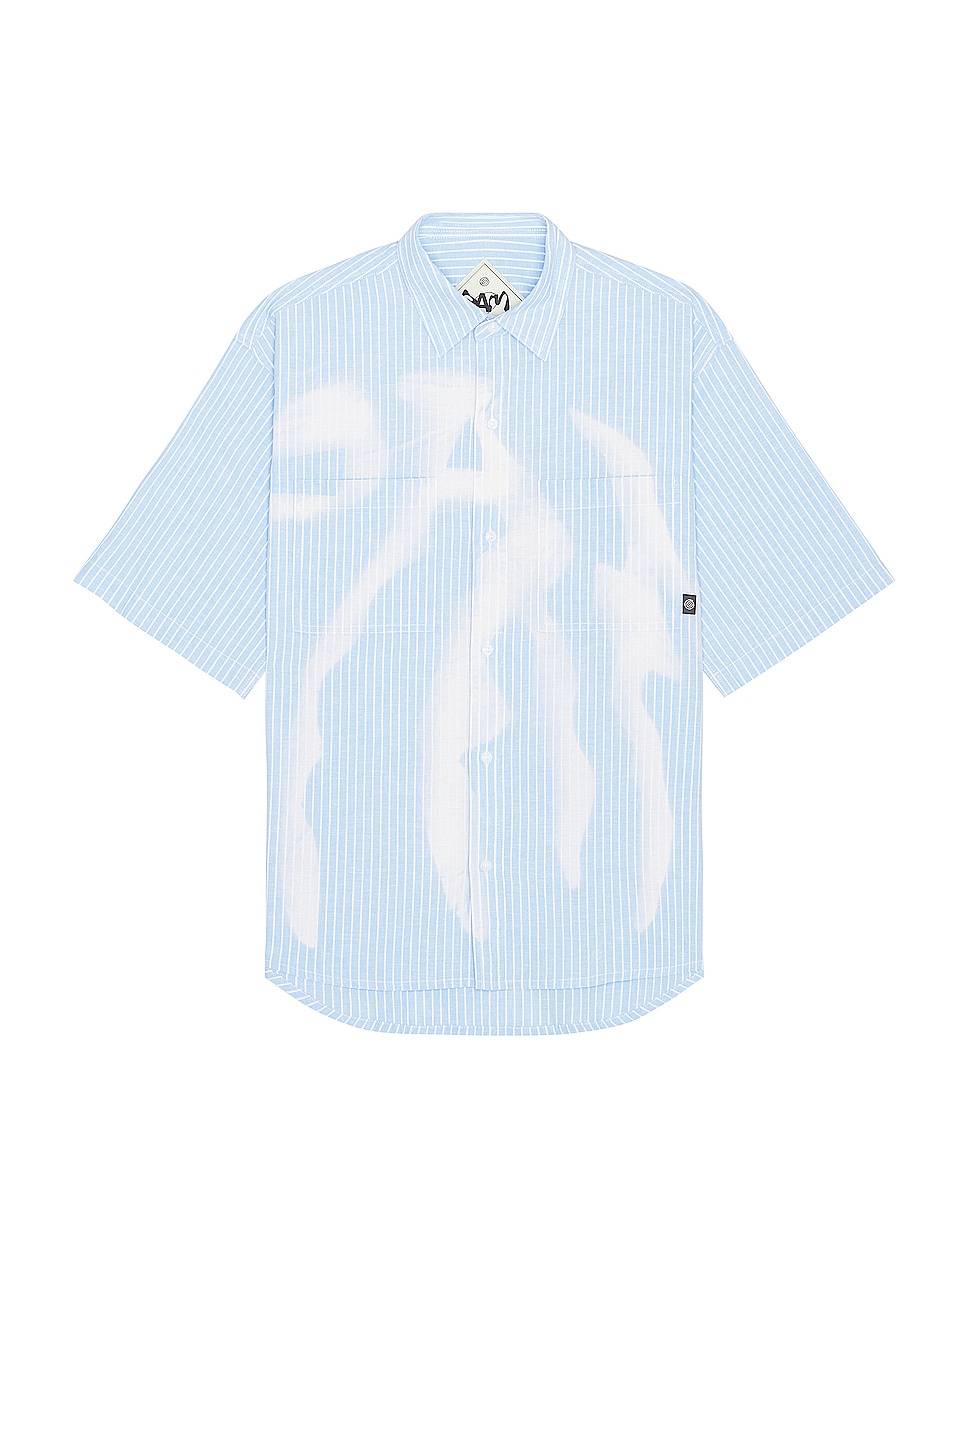 Image 1 of P.A.M. Perks and Mini Cadence Boxy Short Sleeve Shirt in Blue Stripe